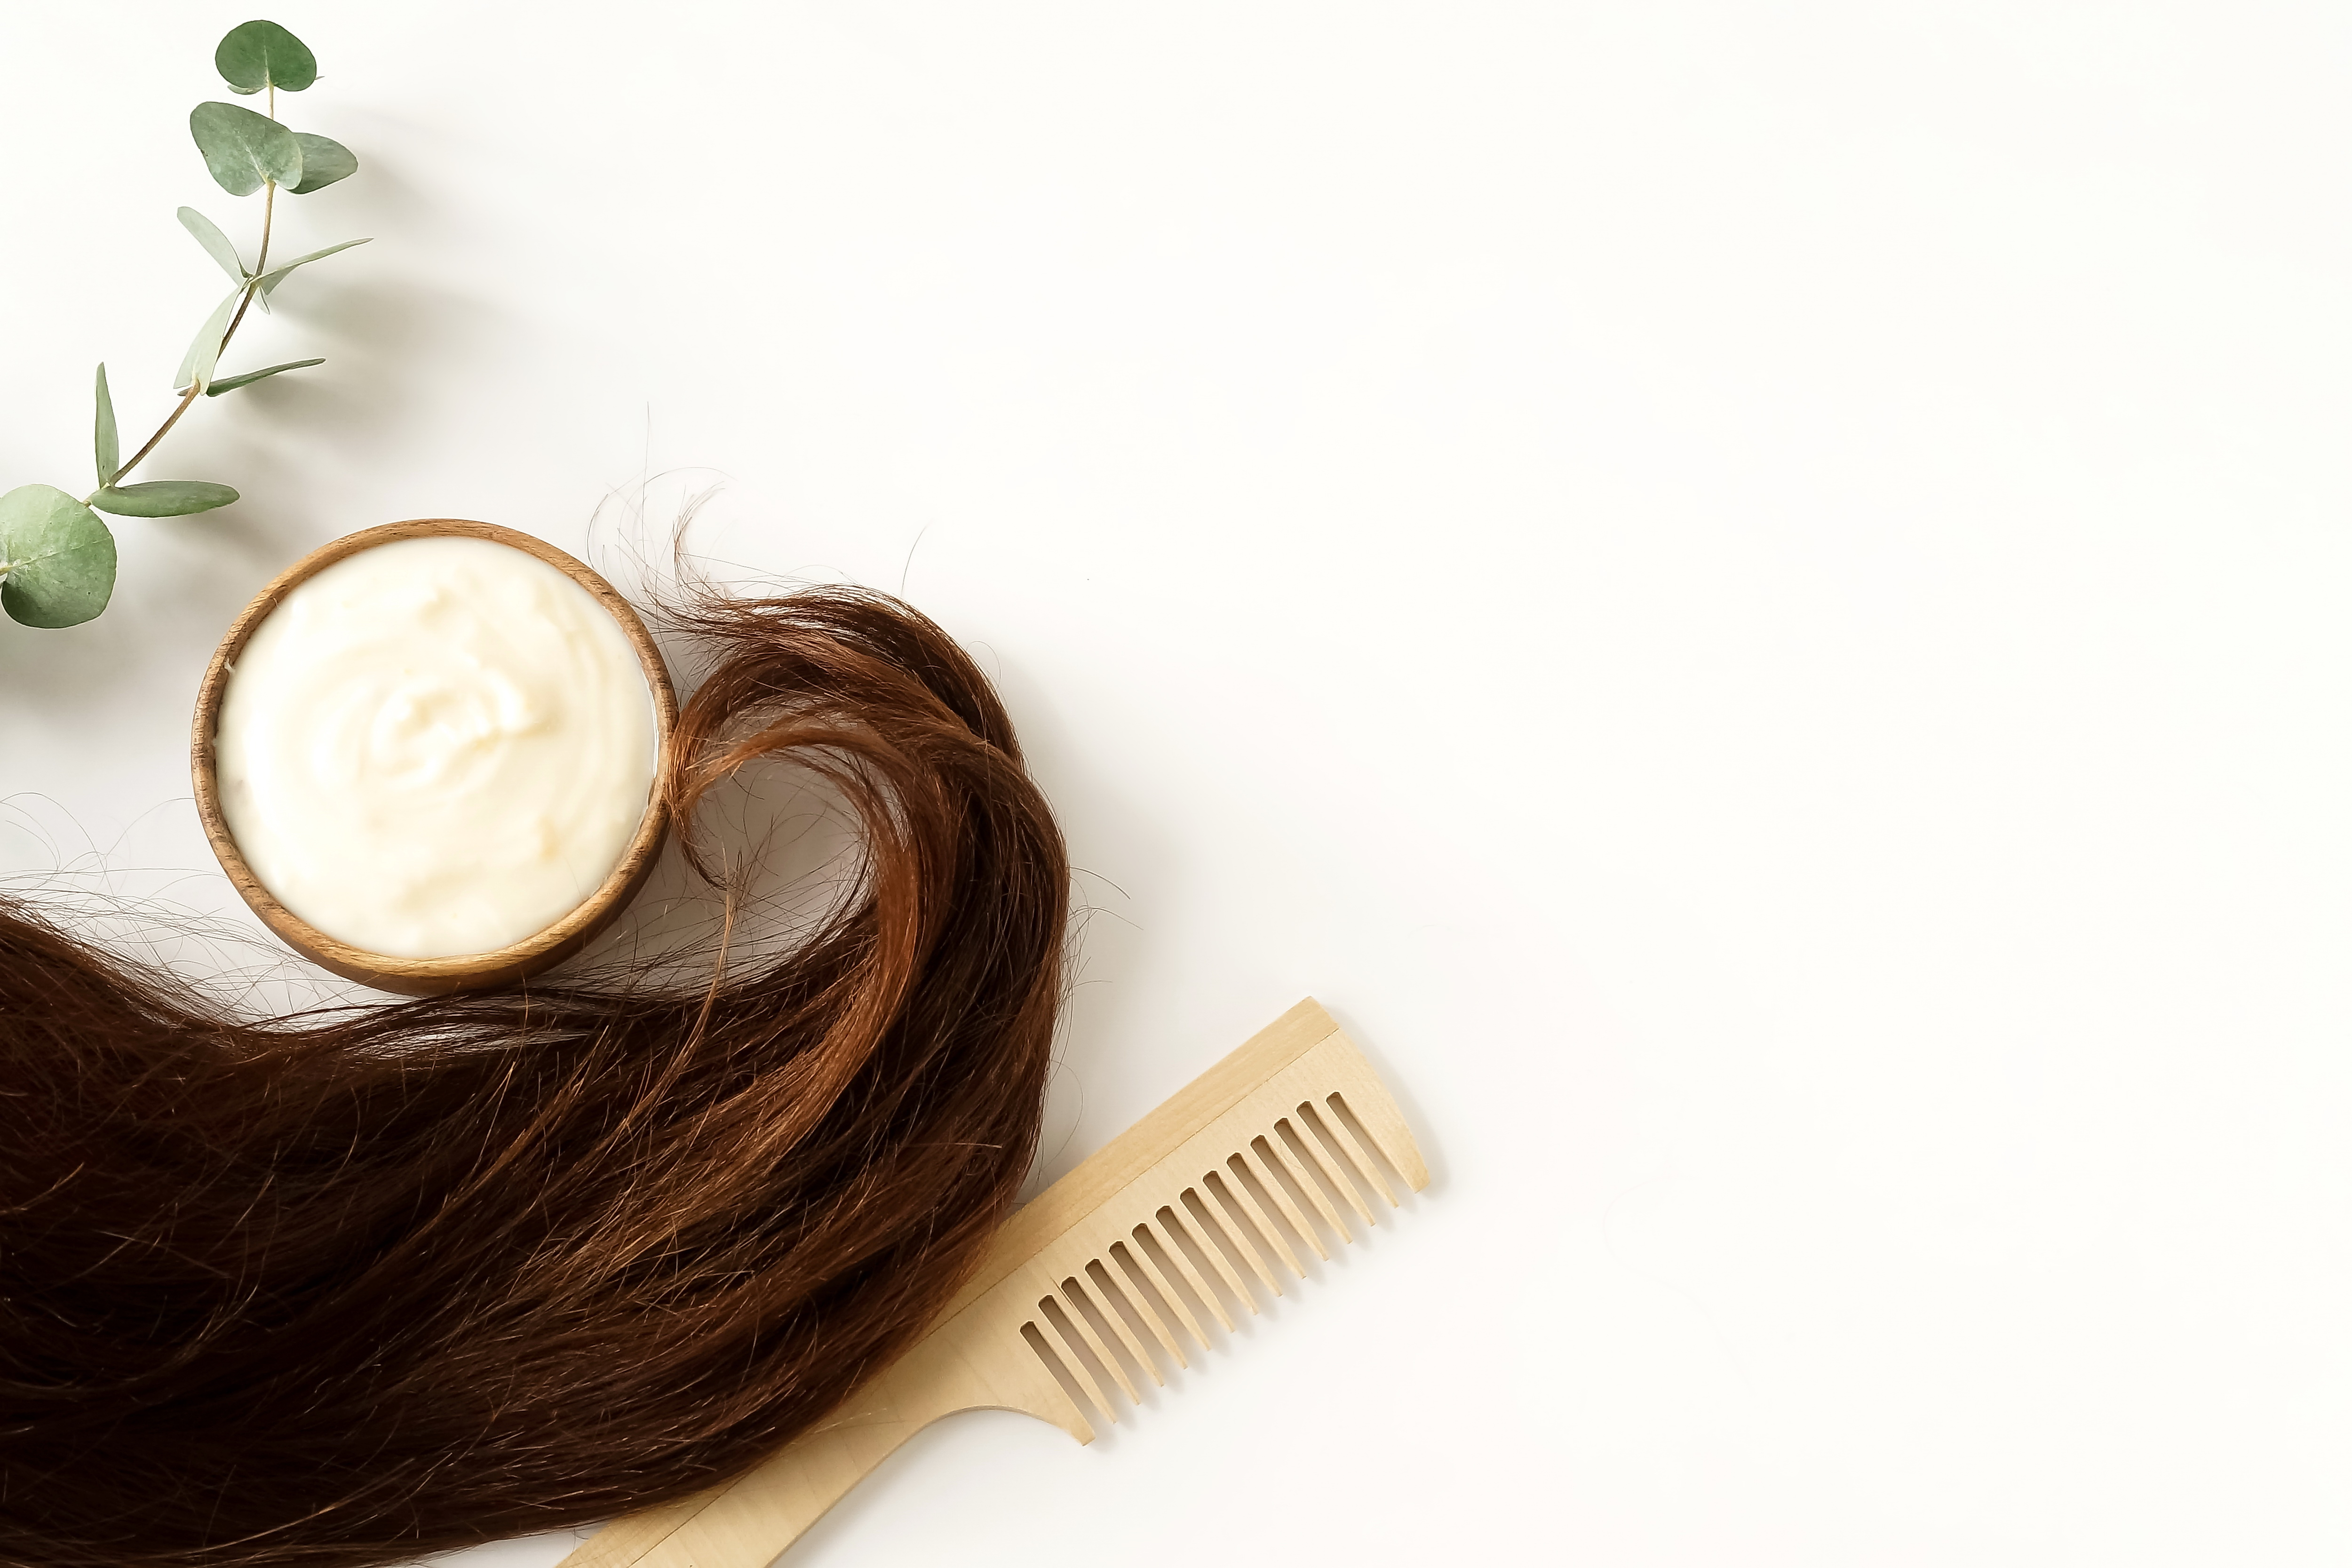 Hair lay next to a hair mask and comb